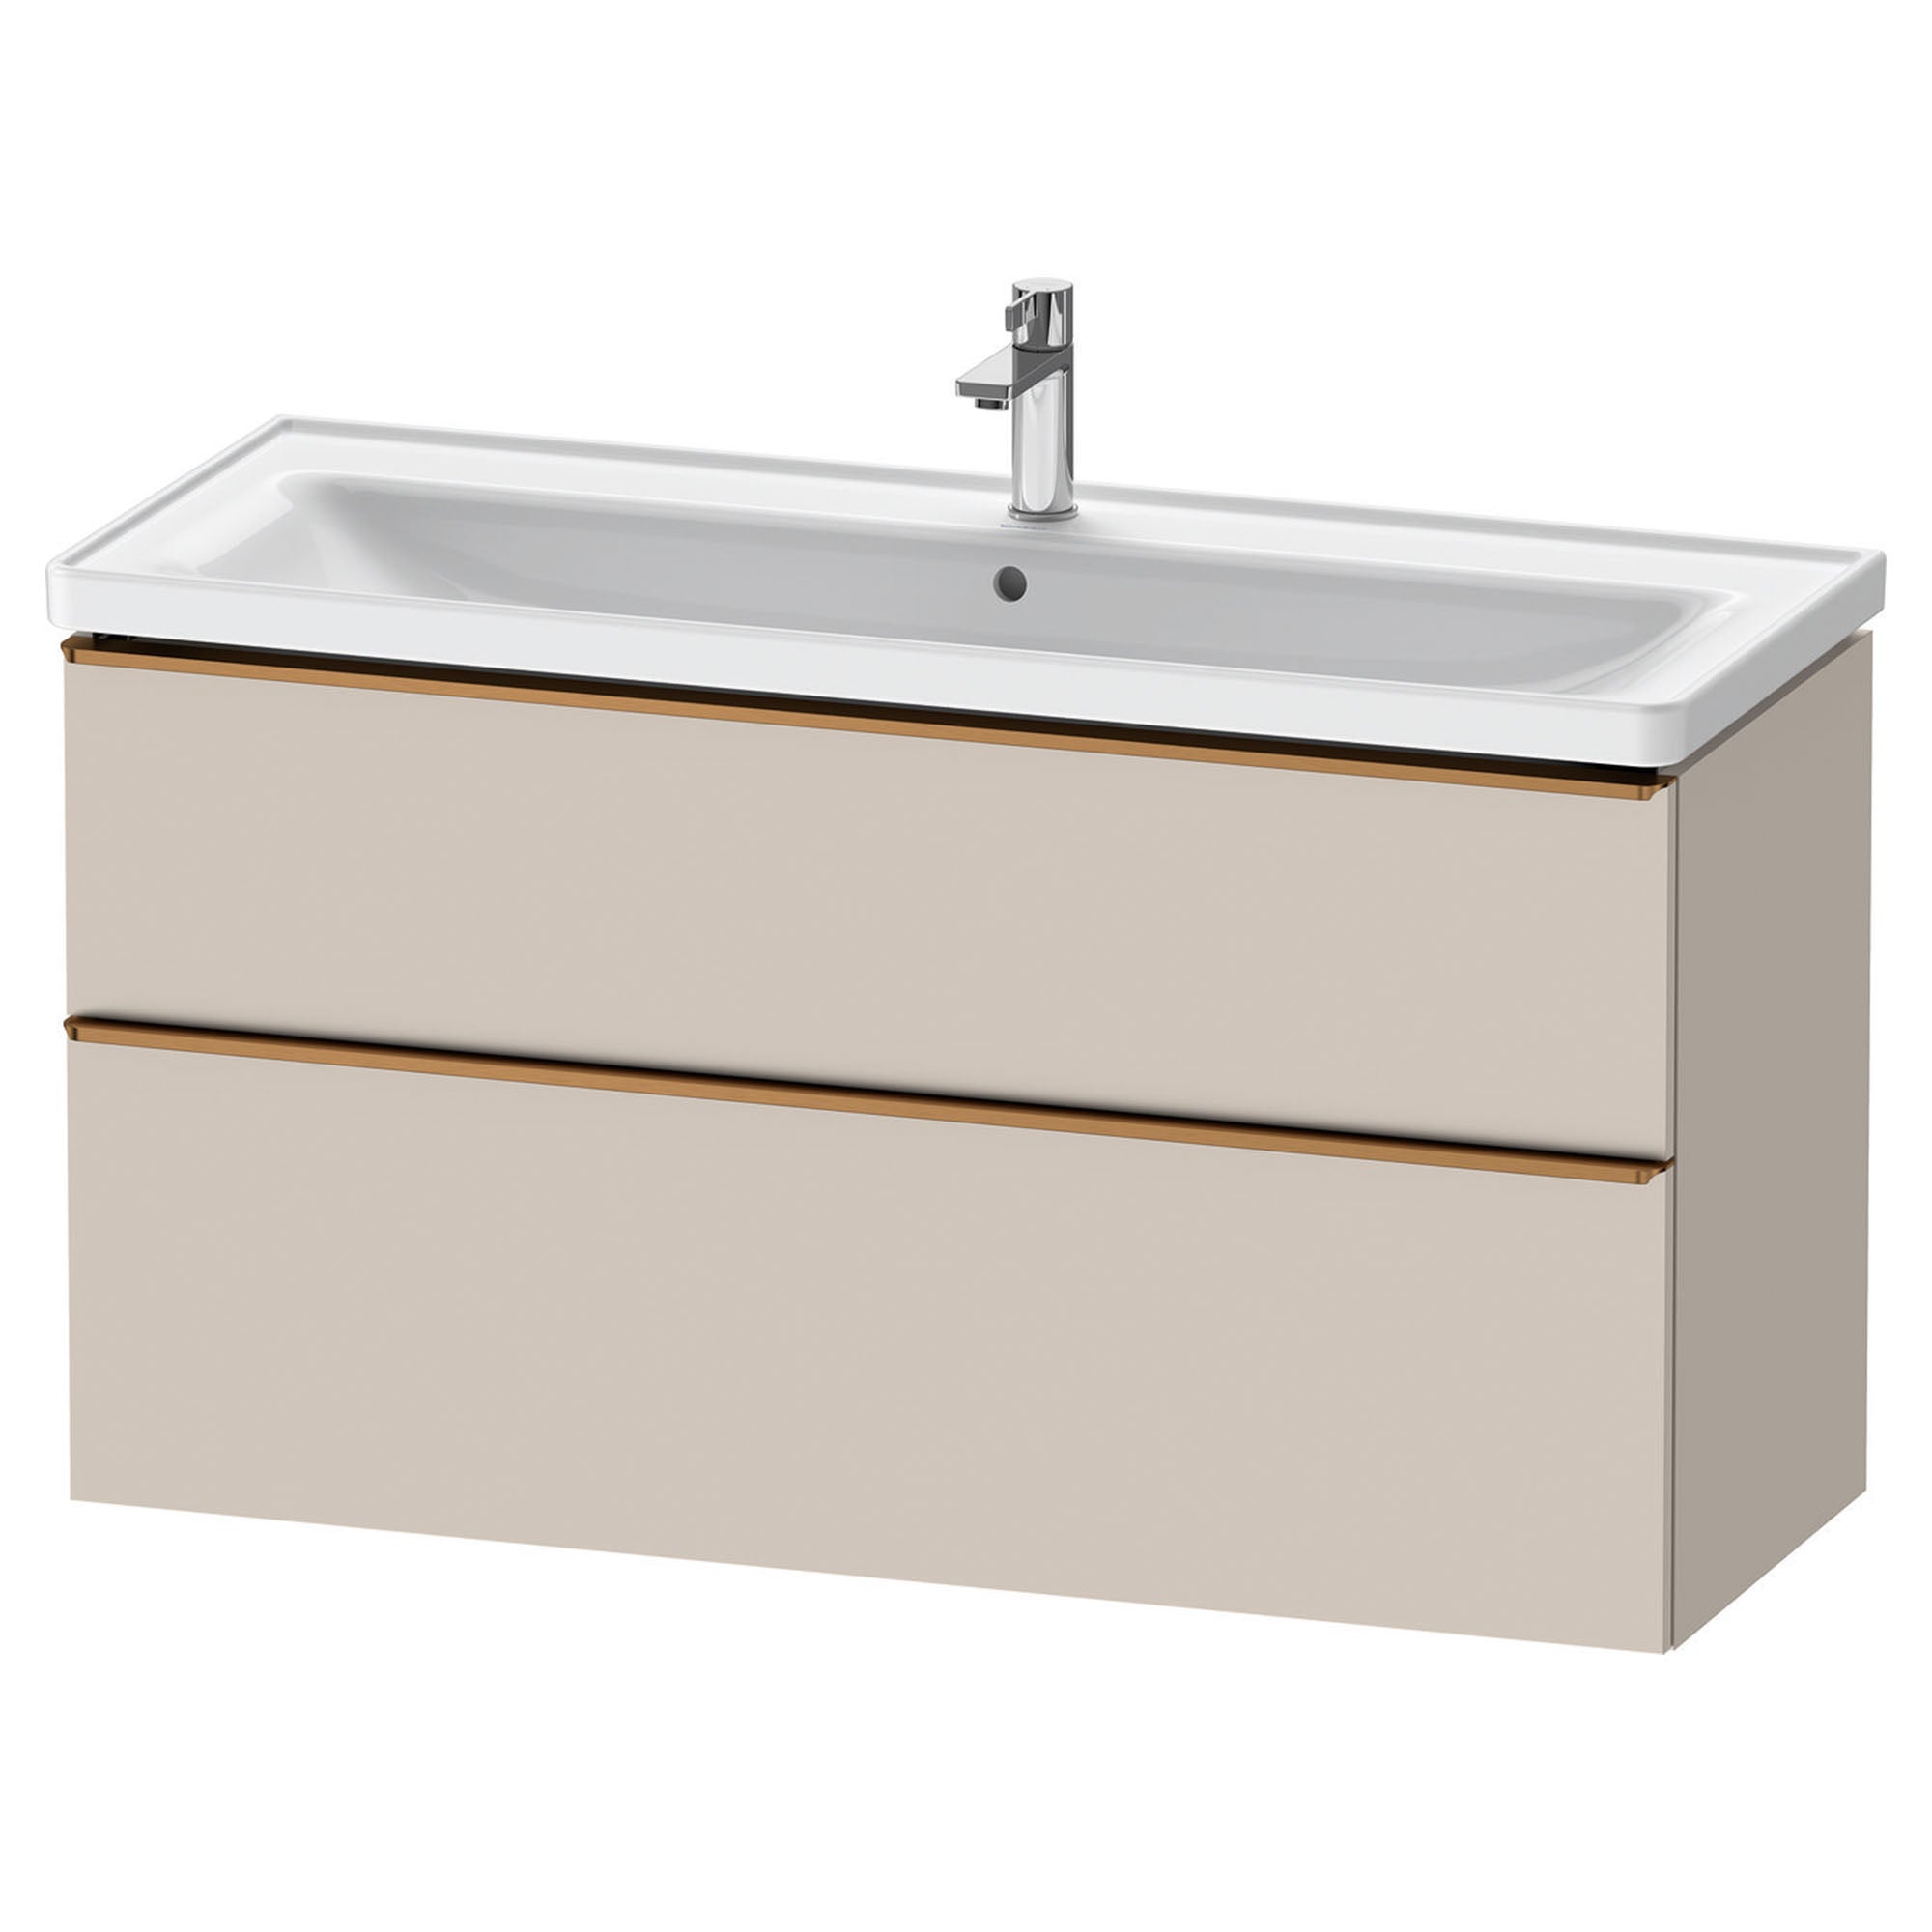 duravit d-neo 1200mm wall mounted vanity unit with d-neo basin taupe brushed bronze handles